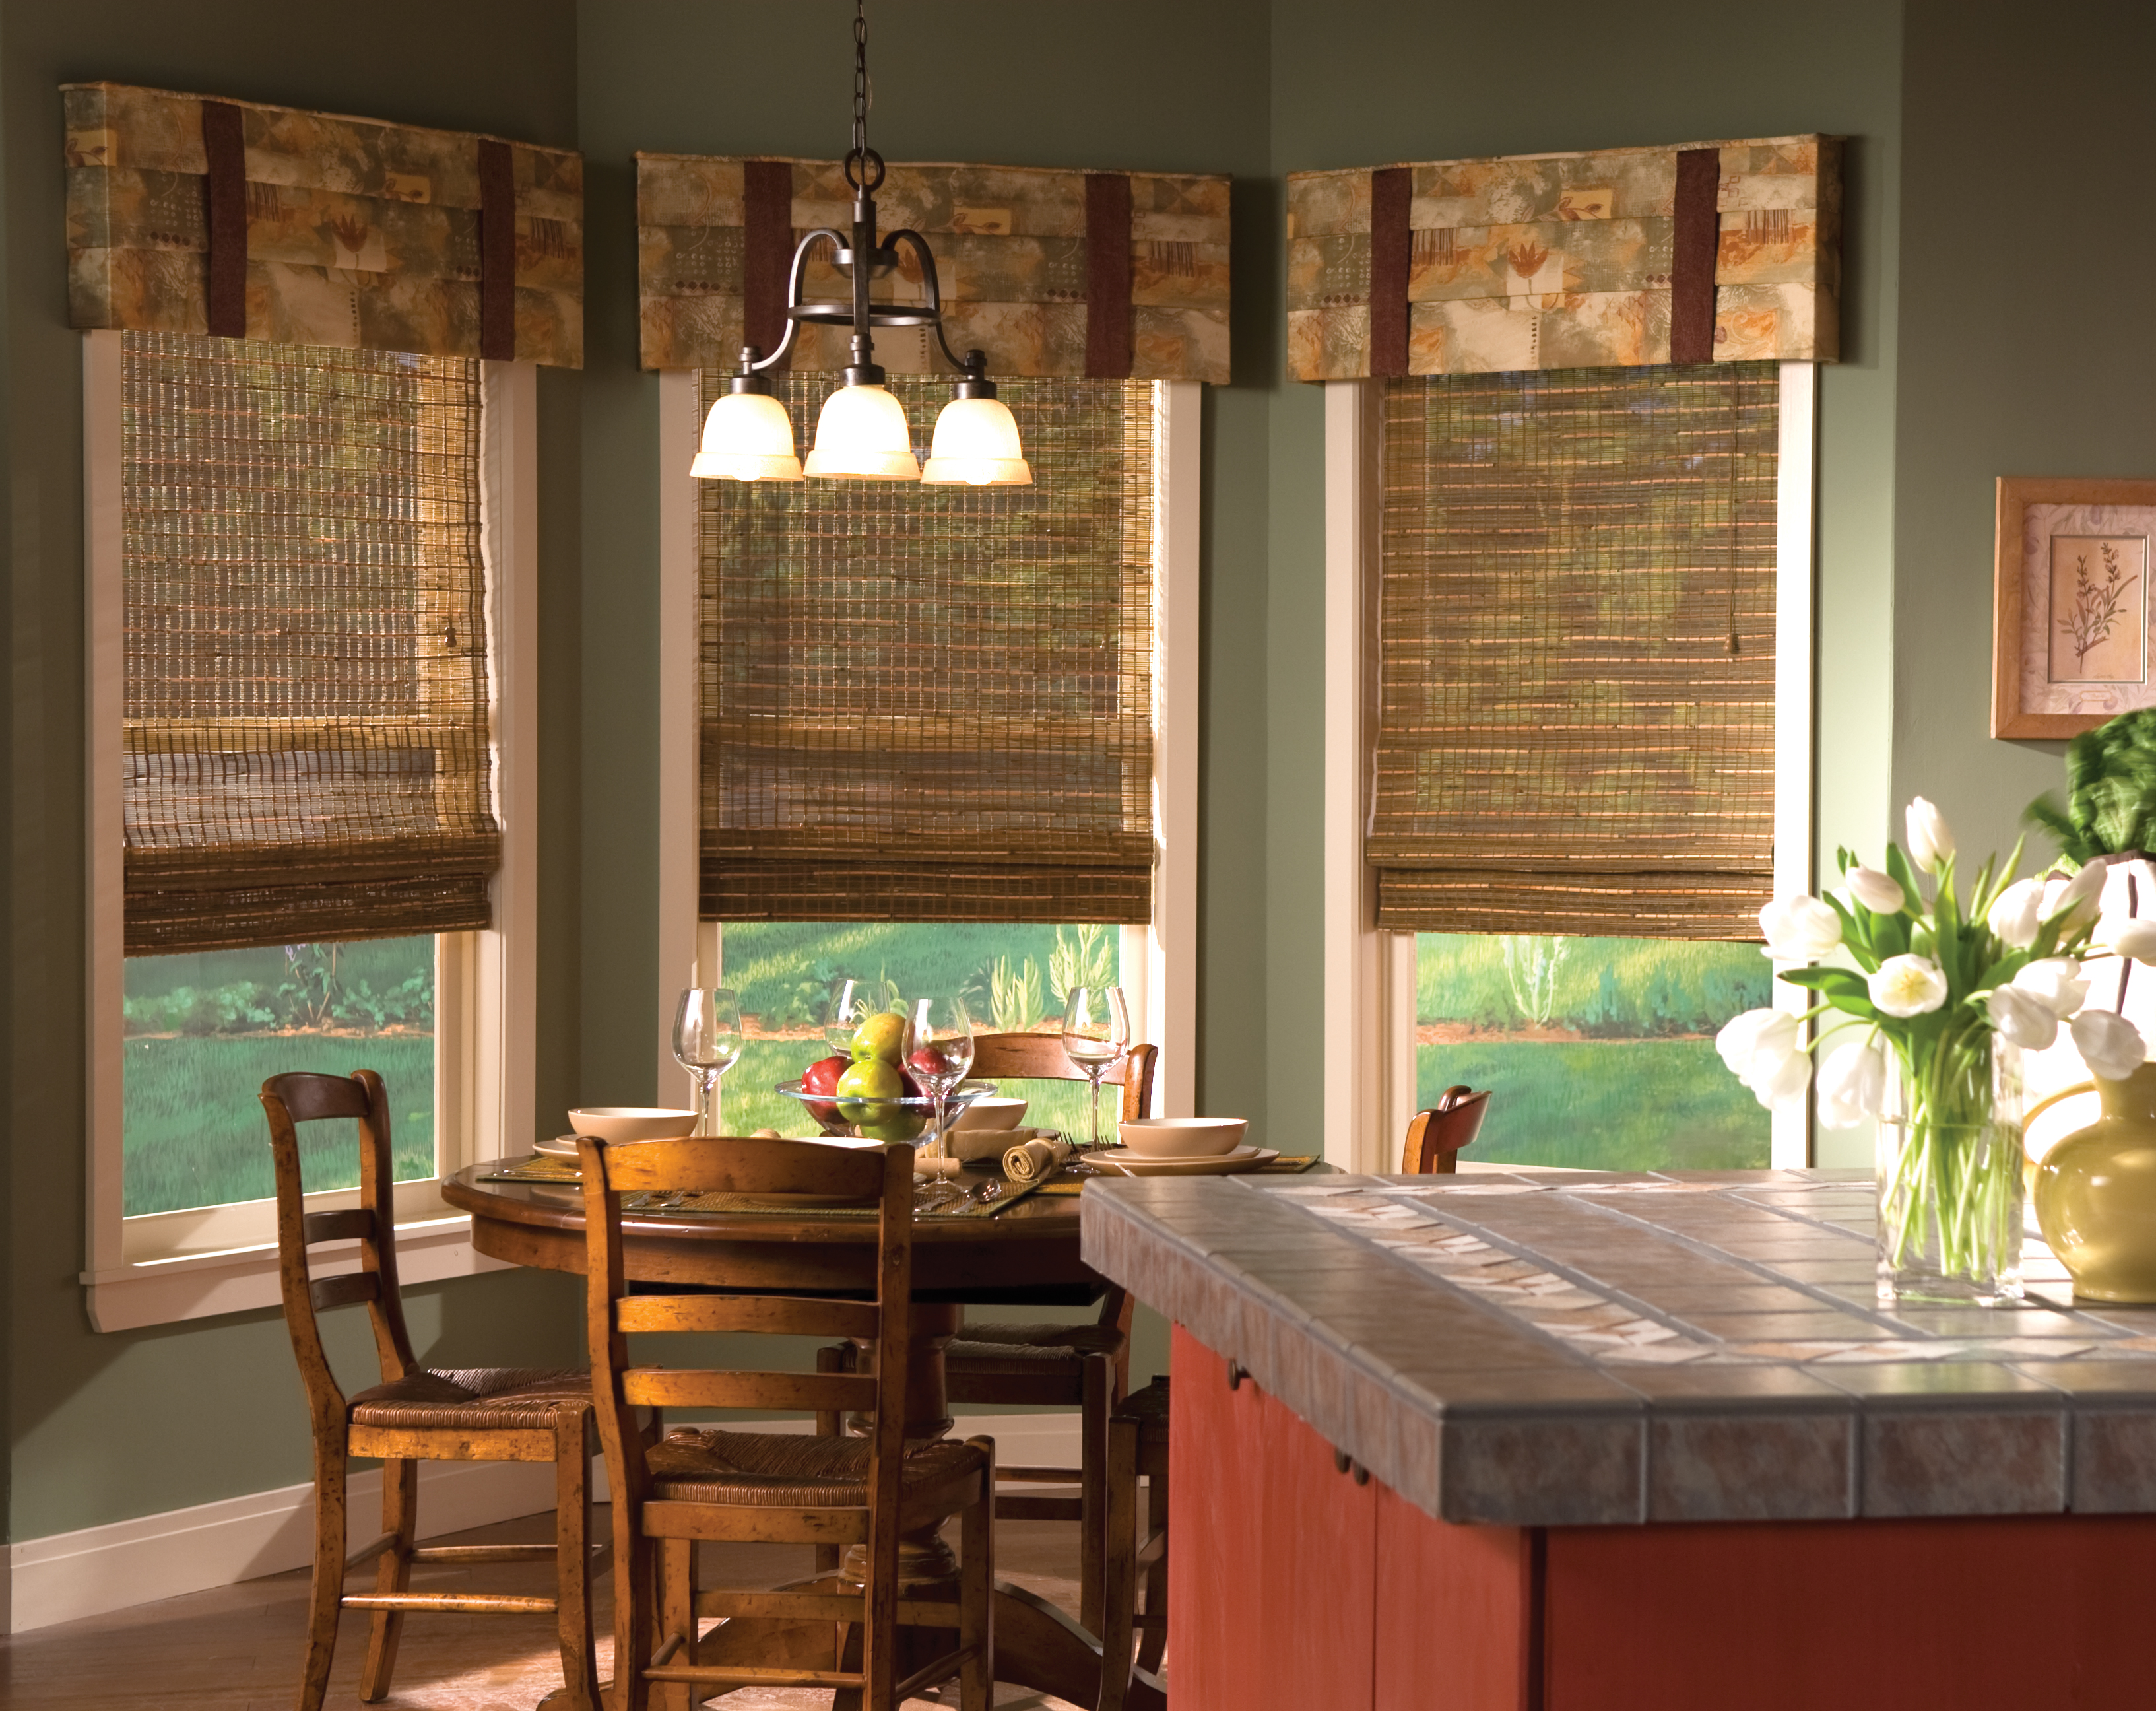 National Window Covering Safety Month